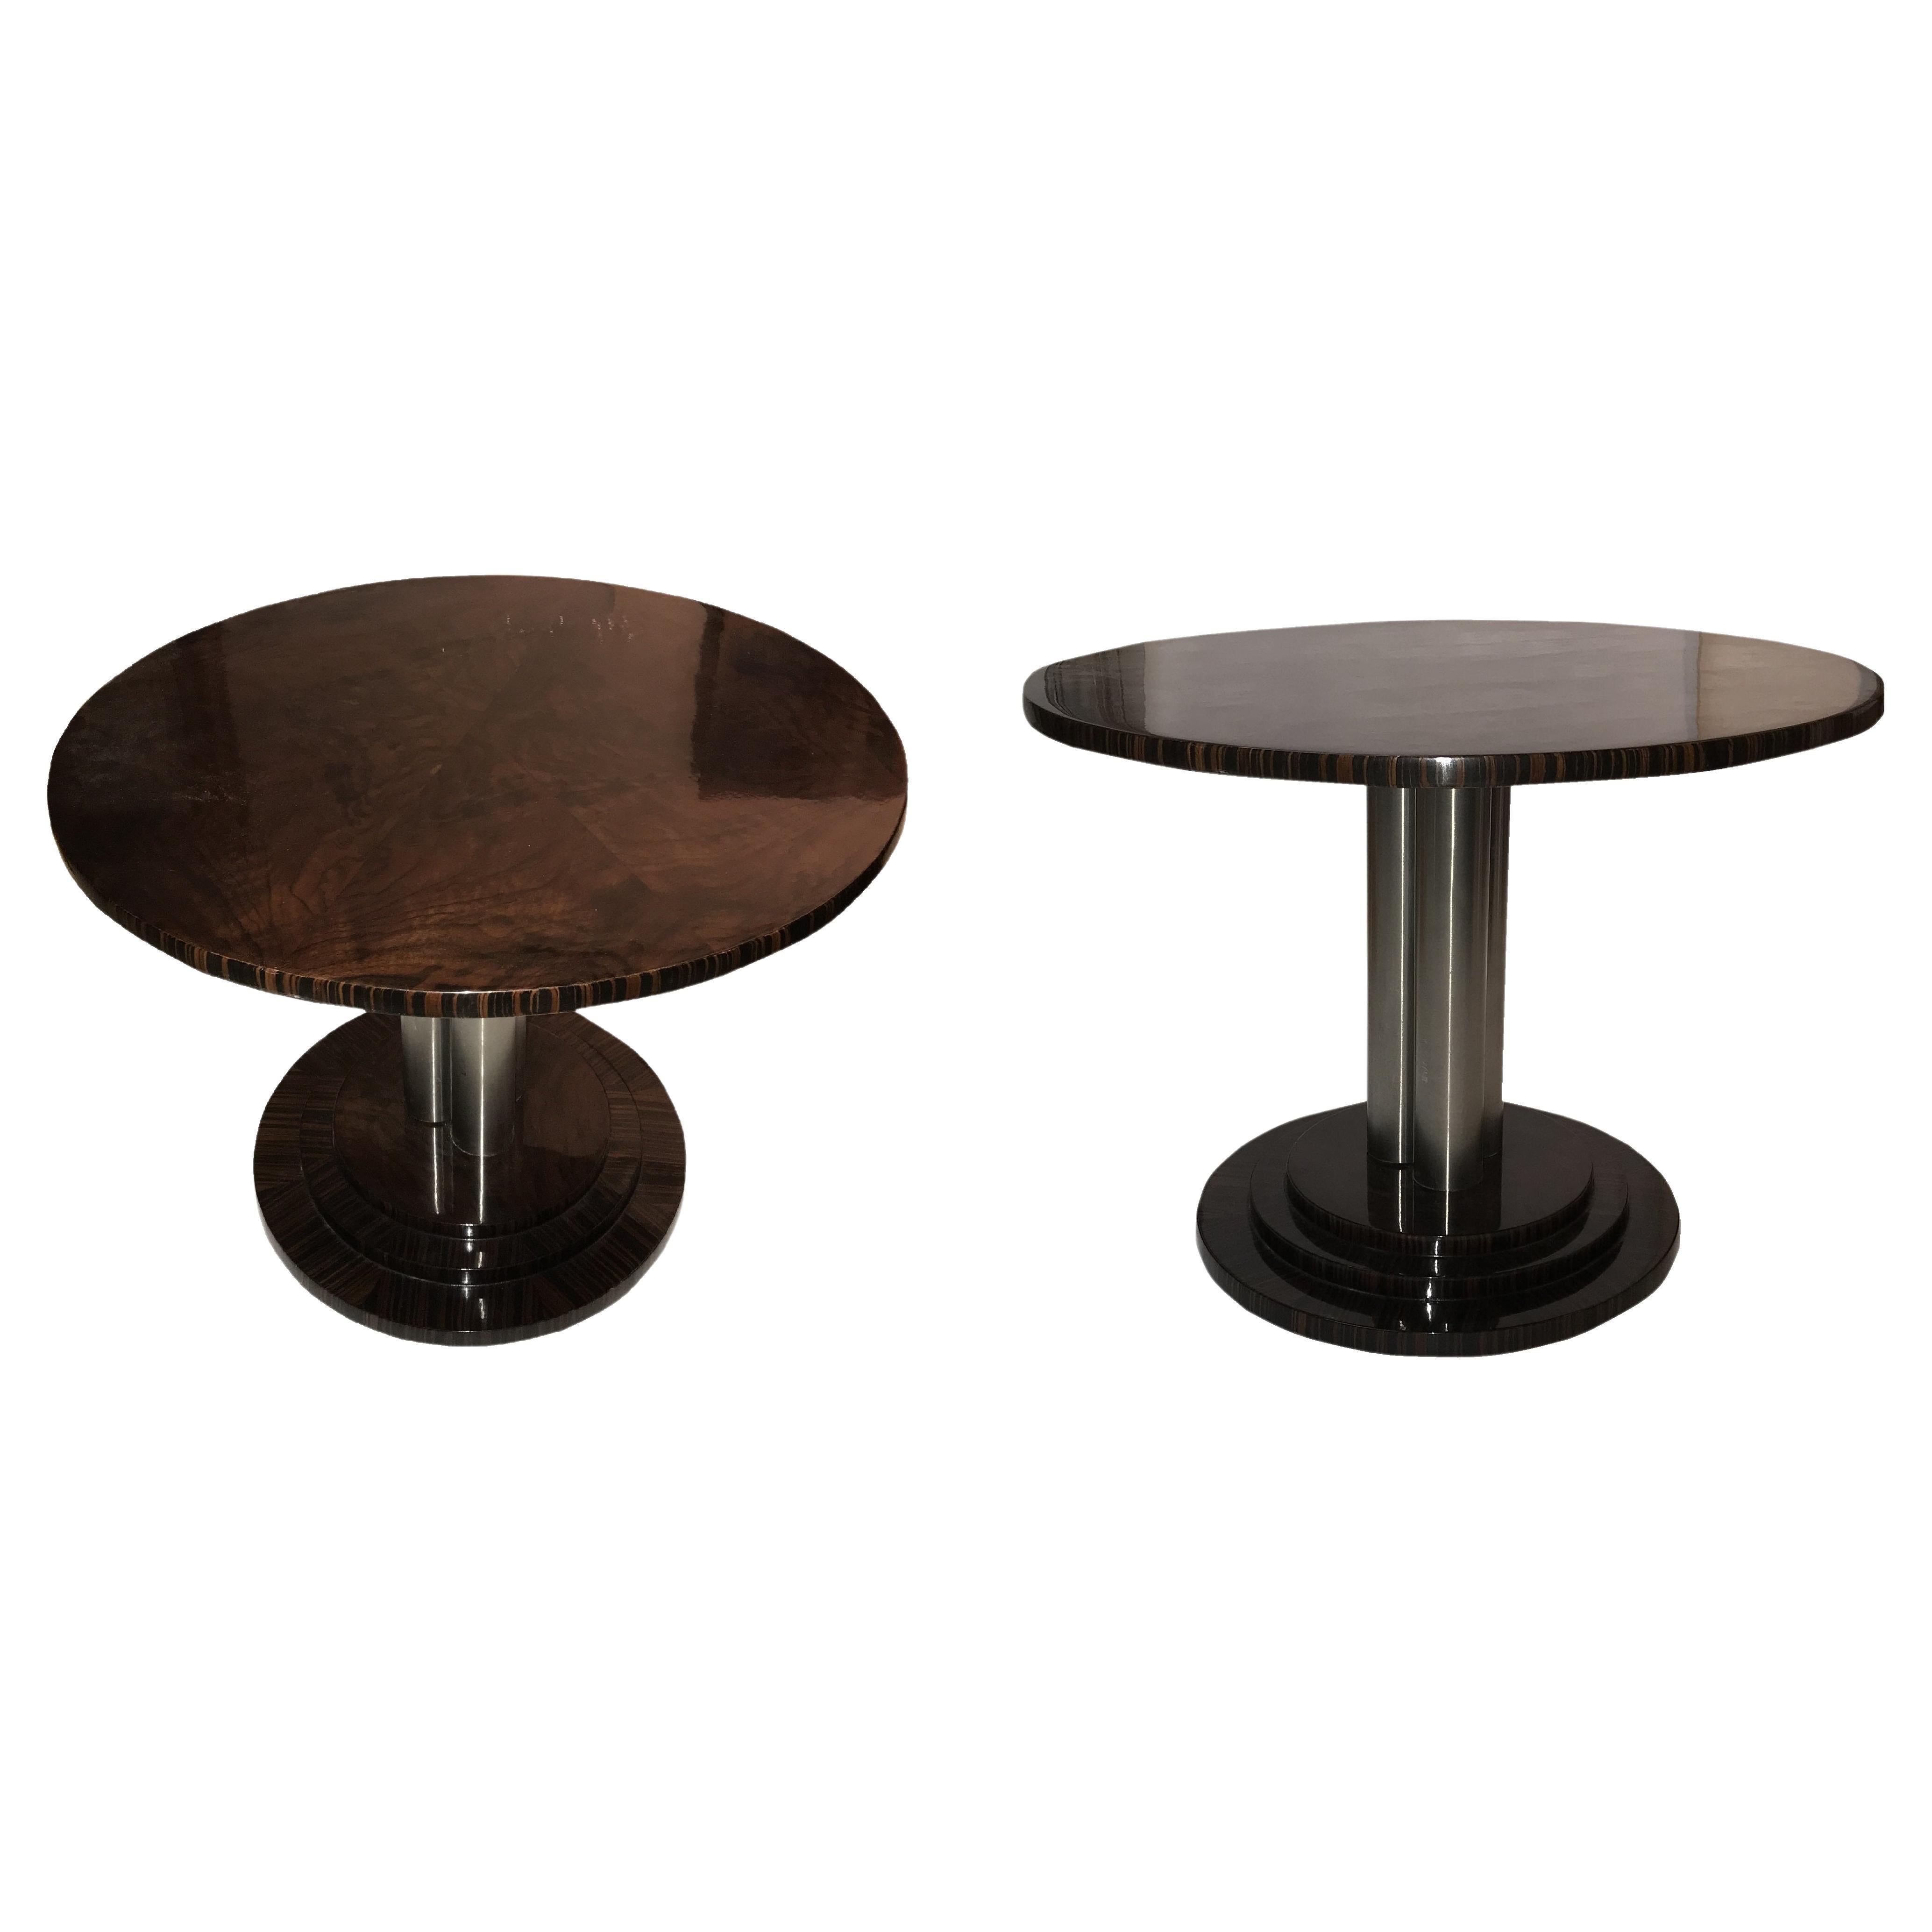 2 Tables in Wood and Chrome, France, 1930